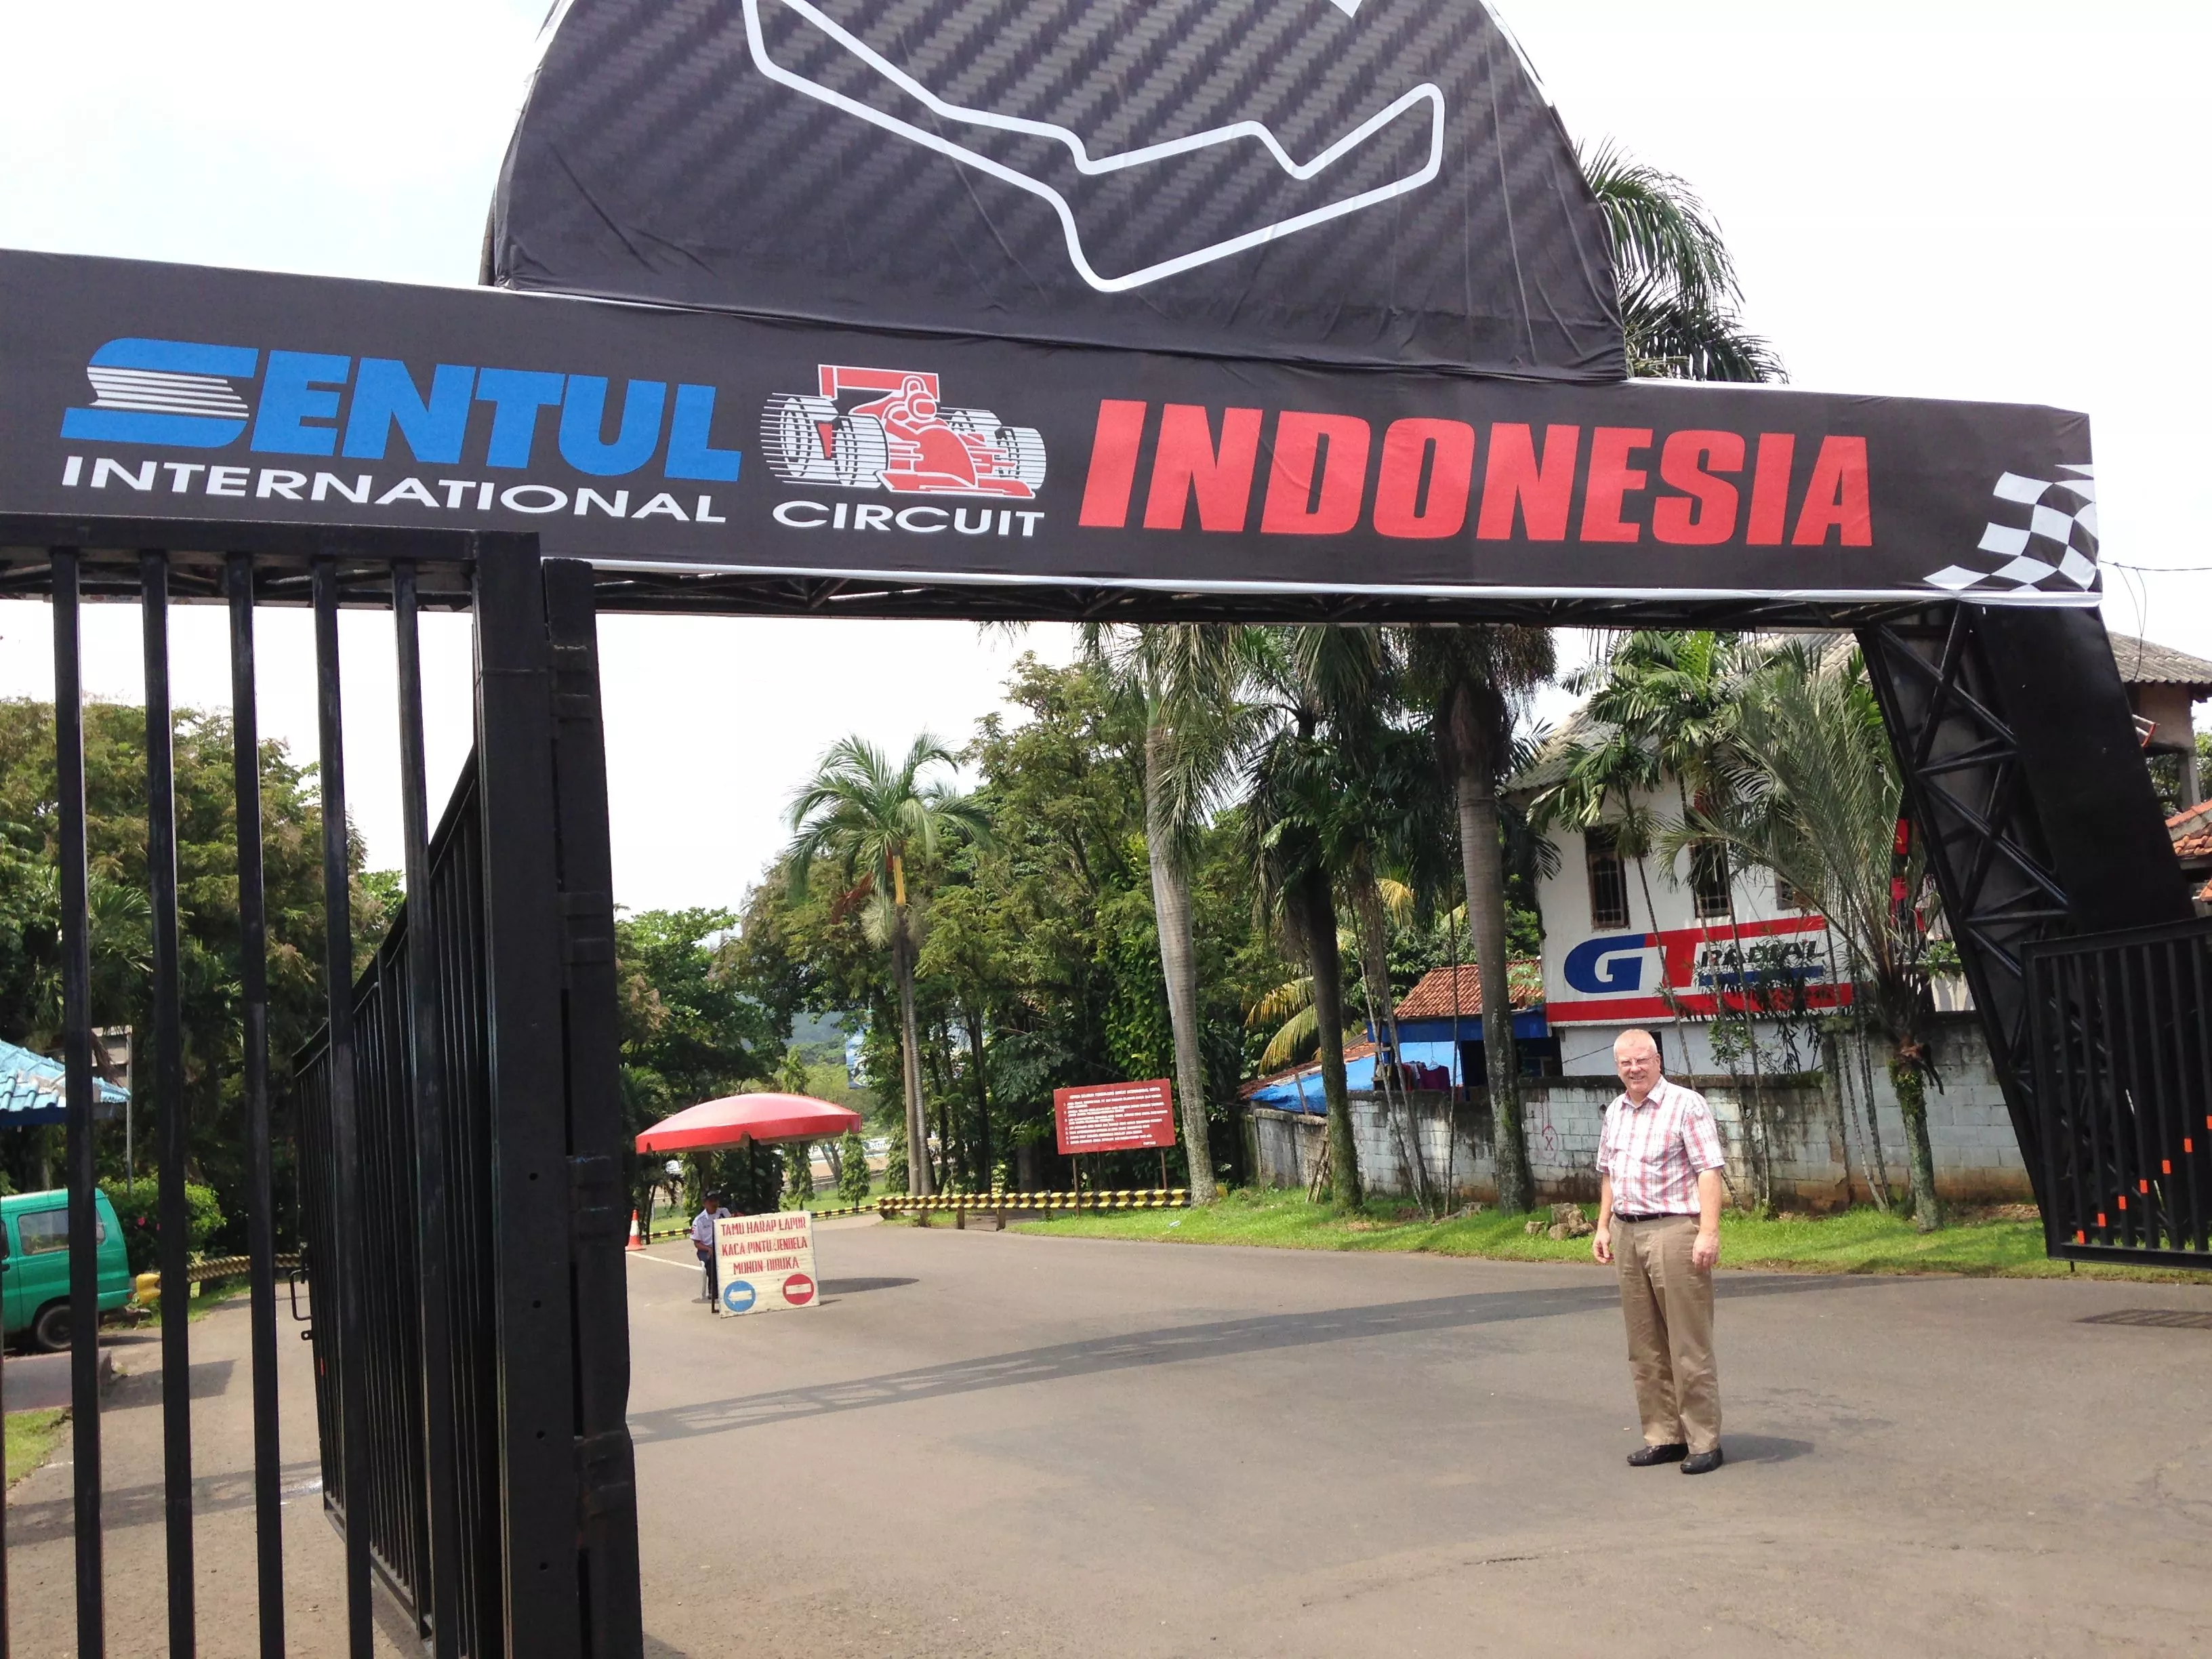 Sentul International Circuit in Indonesia, Central Asia | Racing,Motorcycles - Rated 5.7